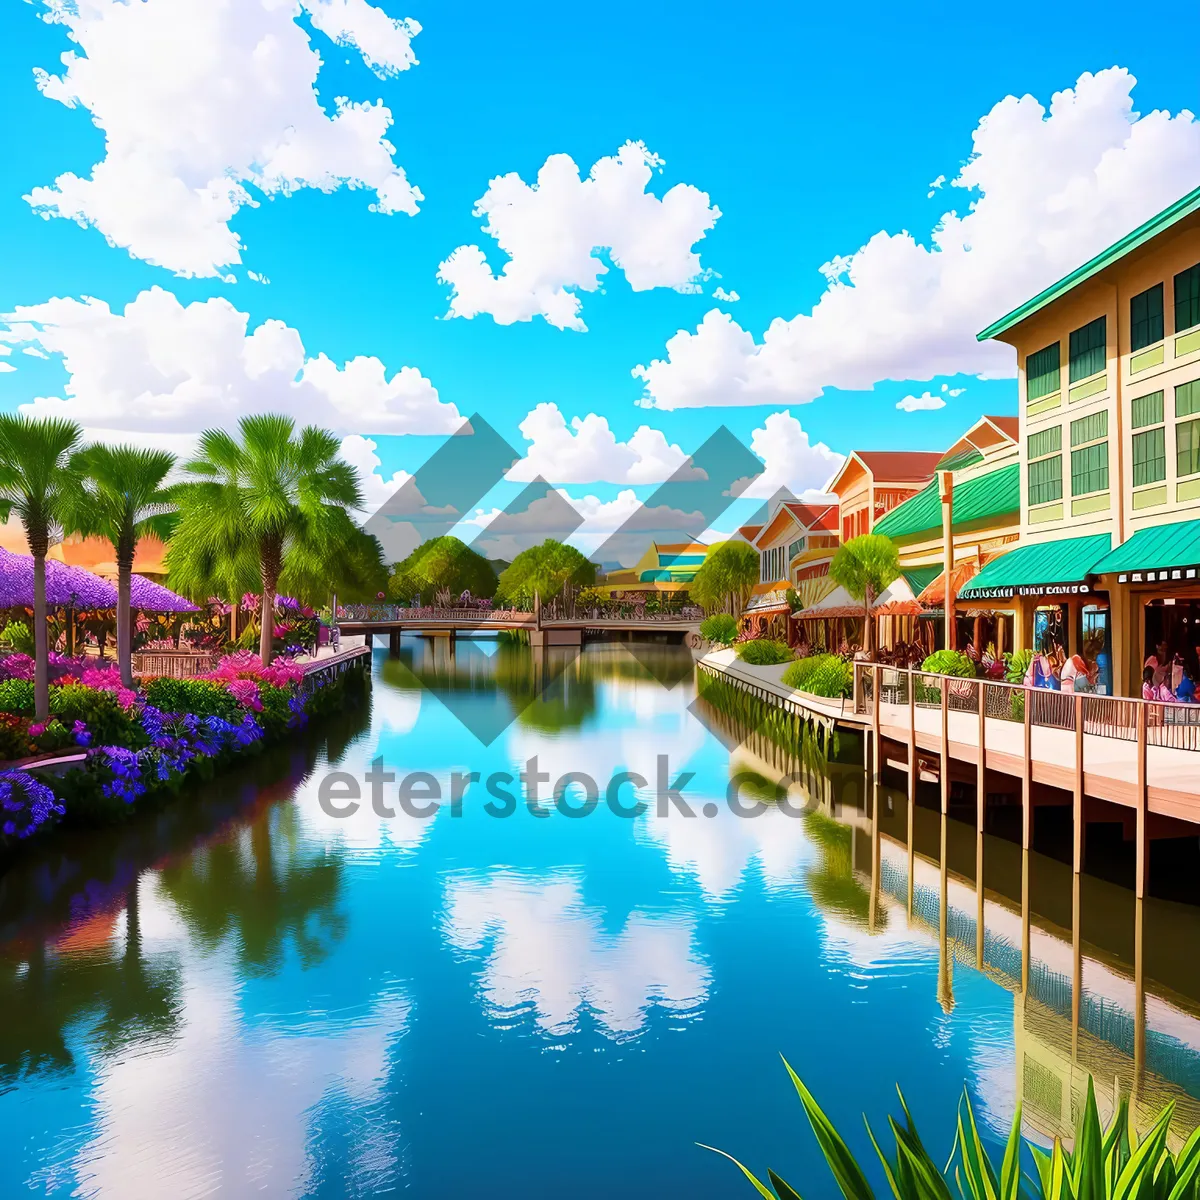 Picture of Tranquil Waterside Resort Reflection at Night